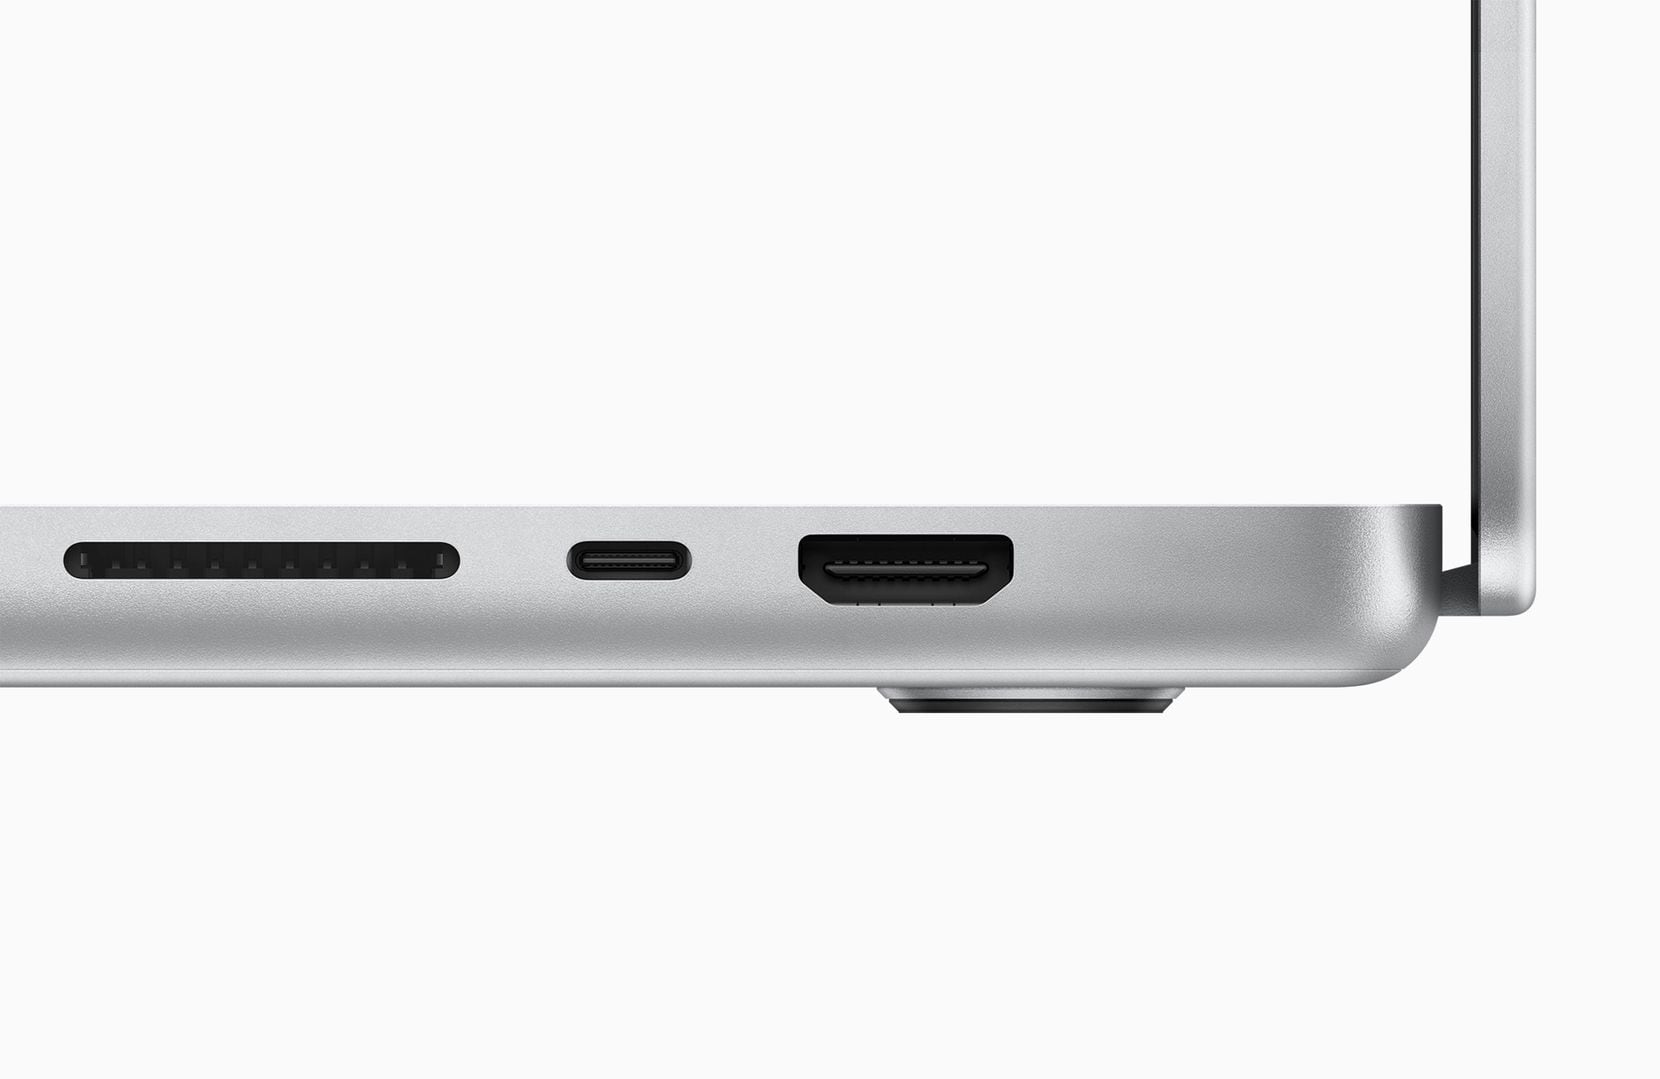 Ports on the right side include HDMI, Thunderbolt 4 and SD card reader.